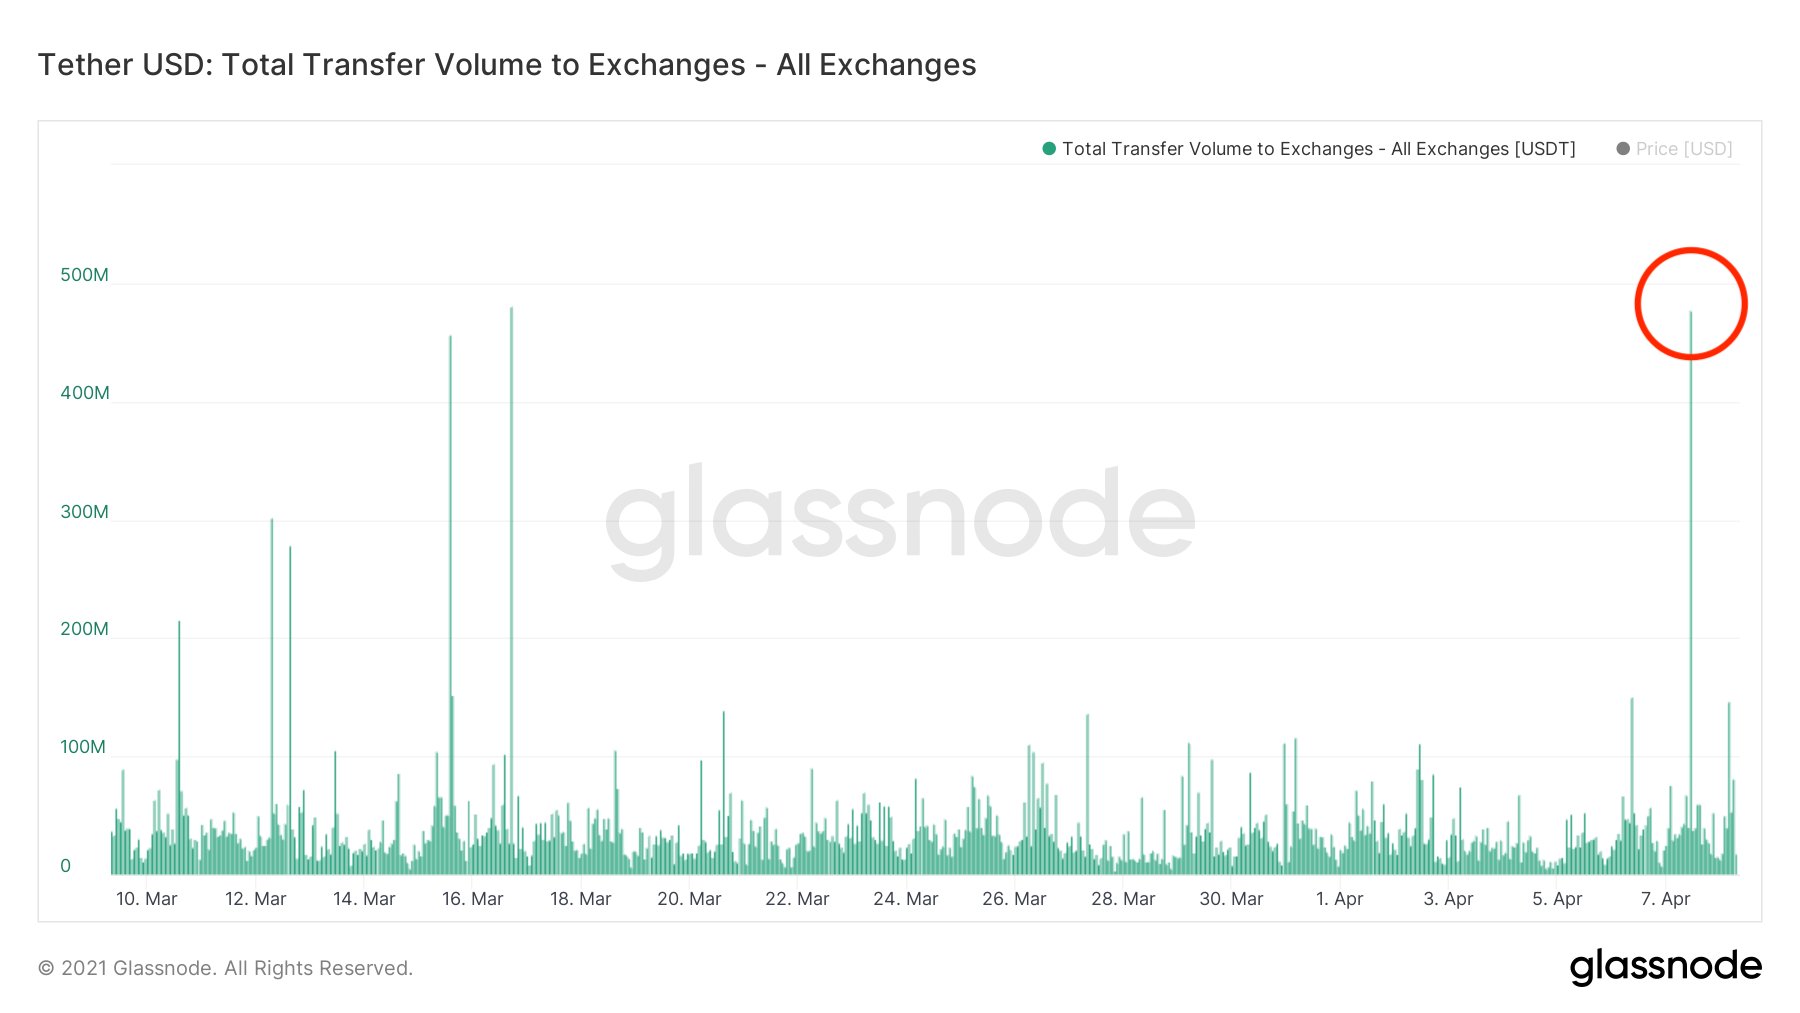 Stablecoin deposits into exchanges. Source: Glassnode